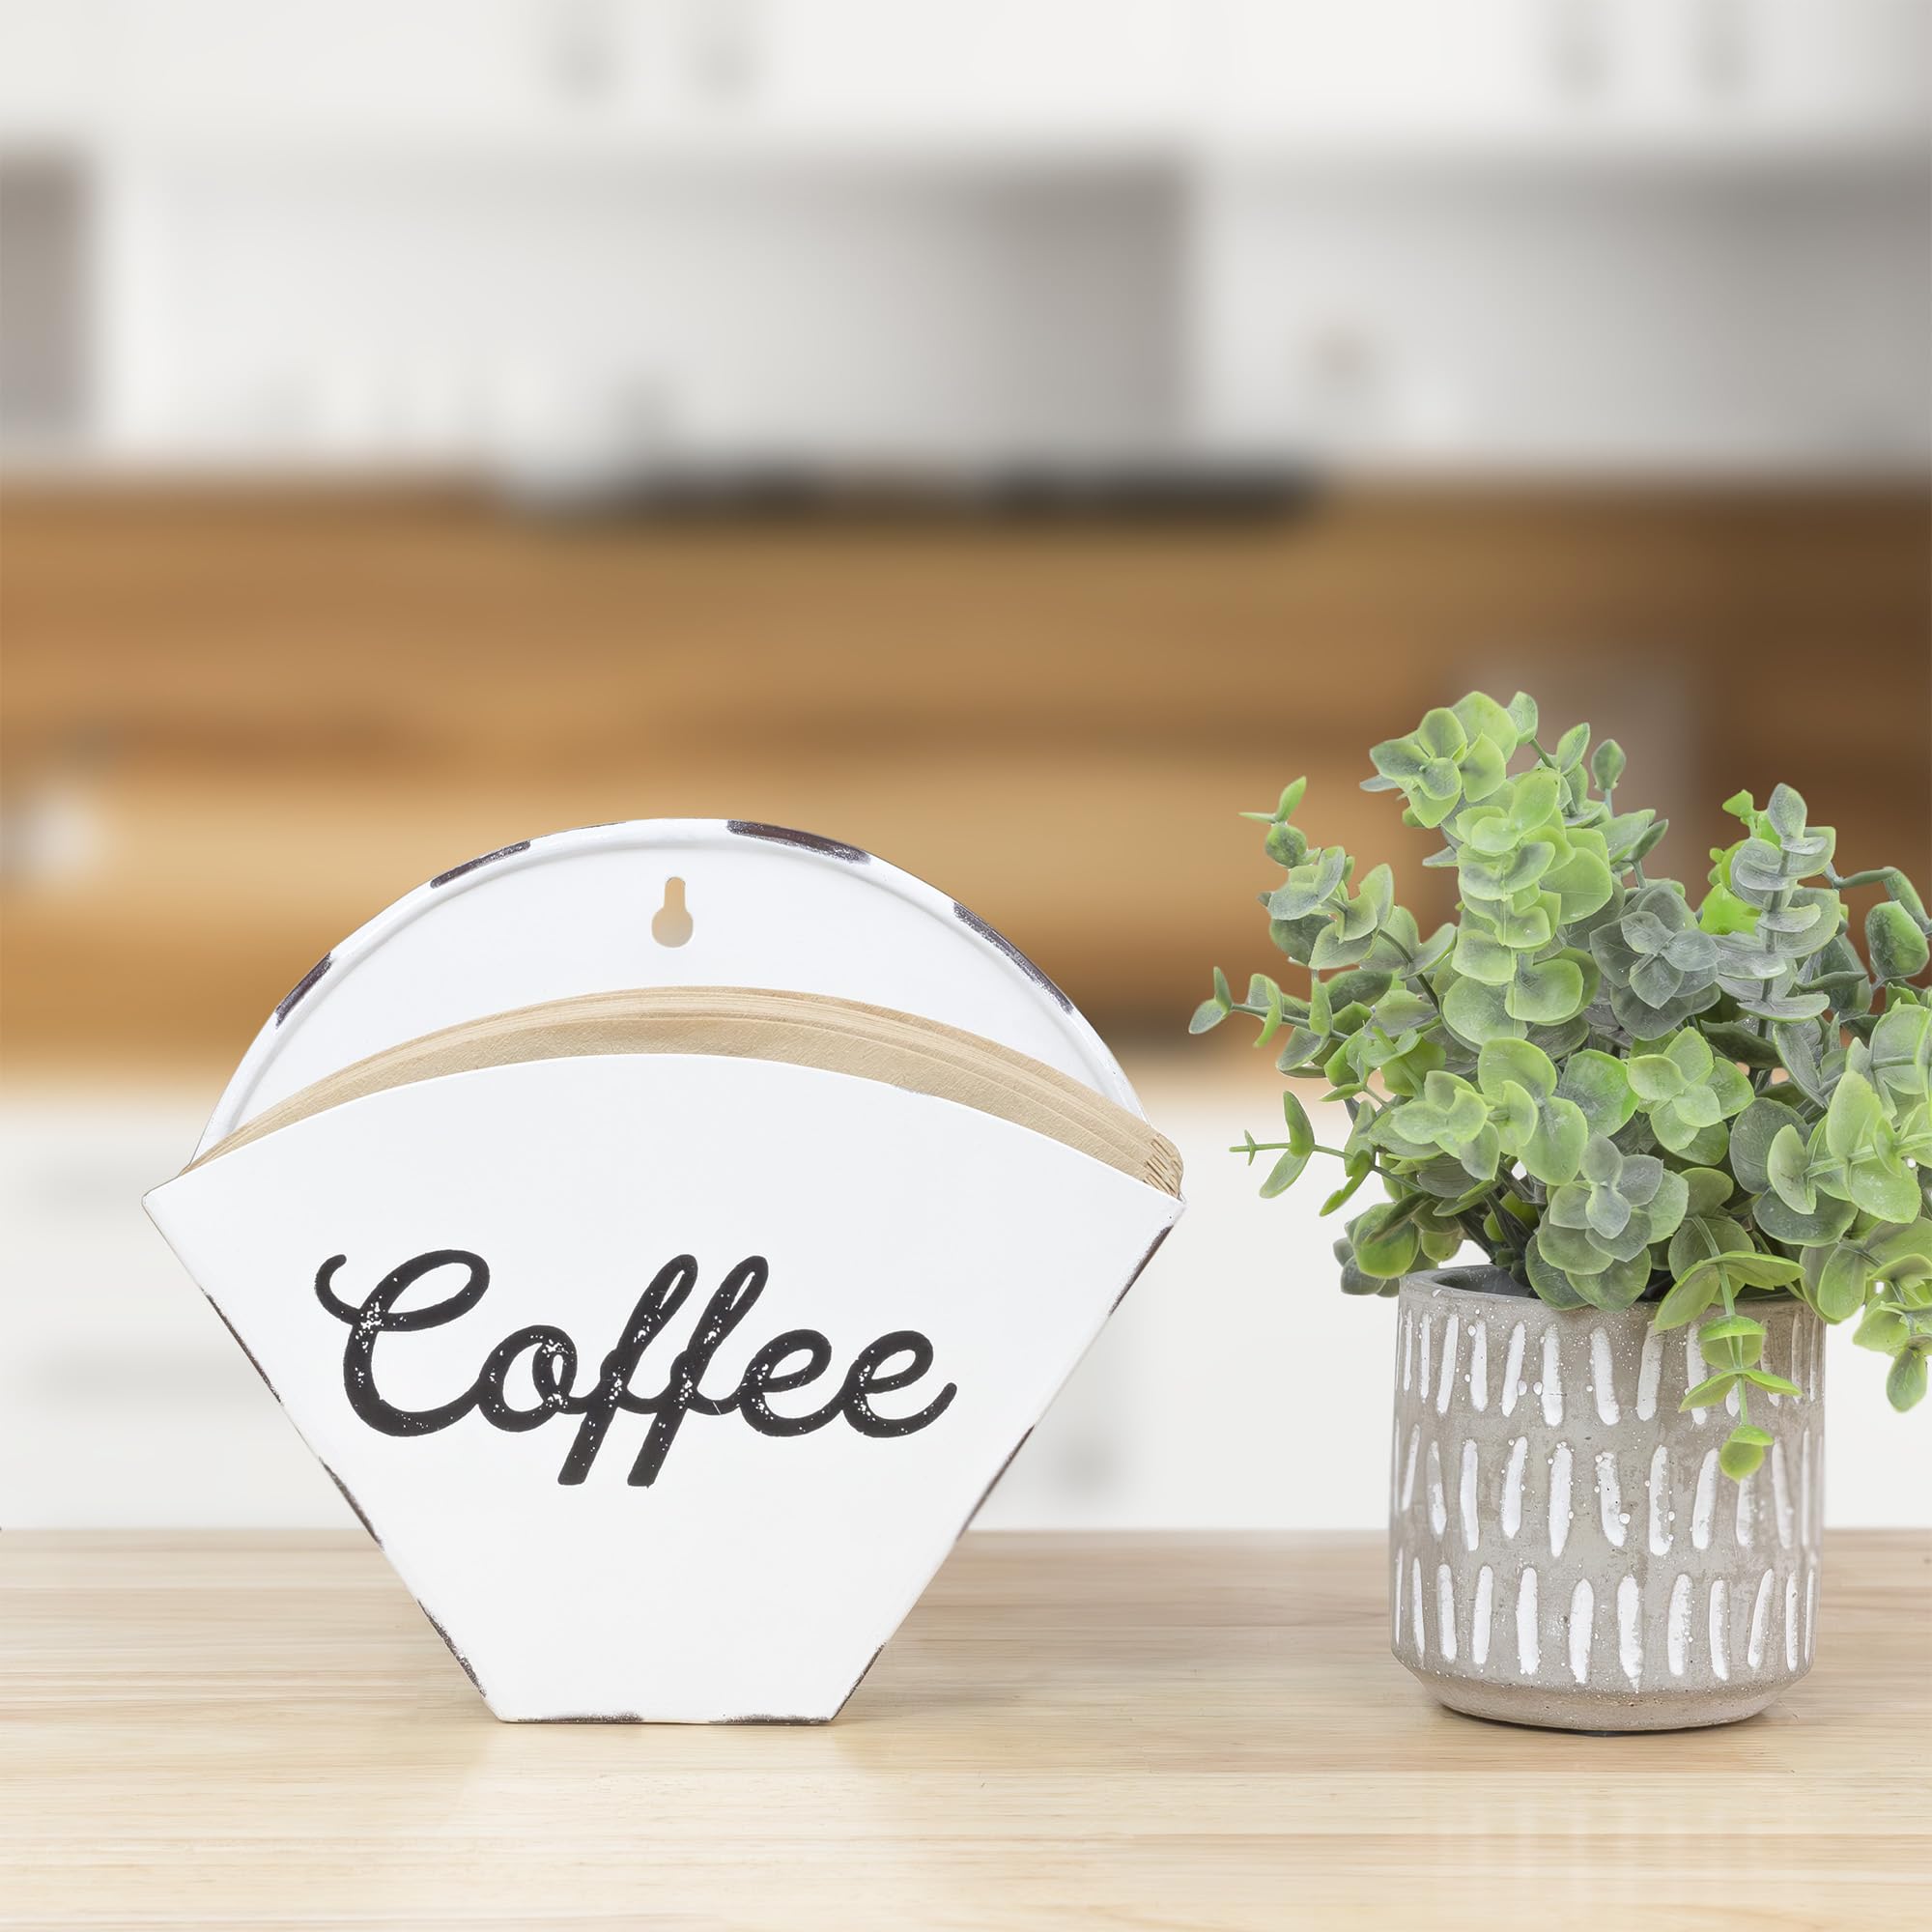 AuldHome Enamelware Coffee Filter Holder (White, Cone-Shaped), Wall-Mount Vintage Farmhouse Style White Filter Storage Container